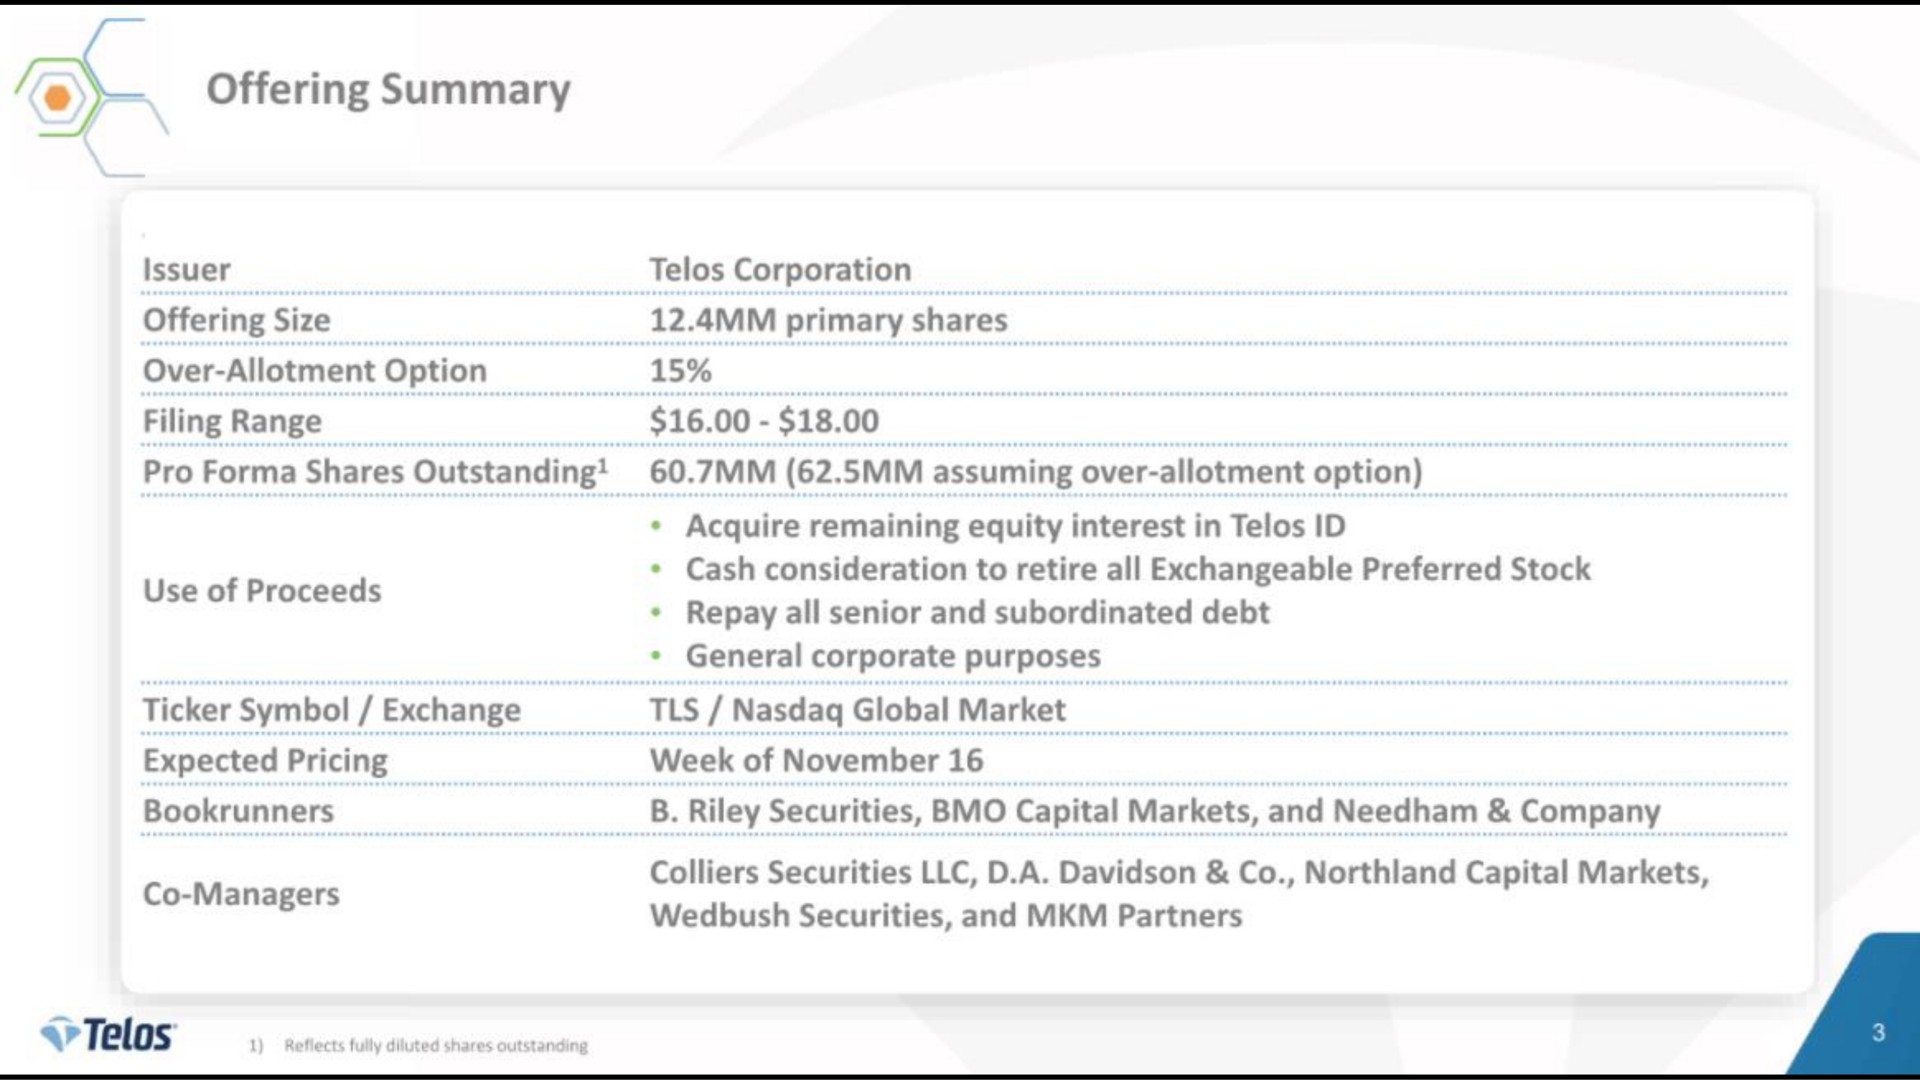 offering summary managers securities and partners | Telos